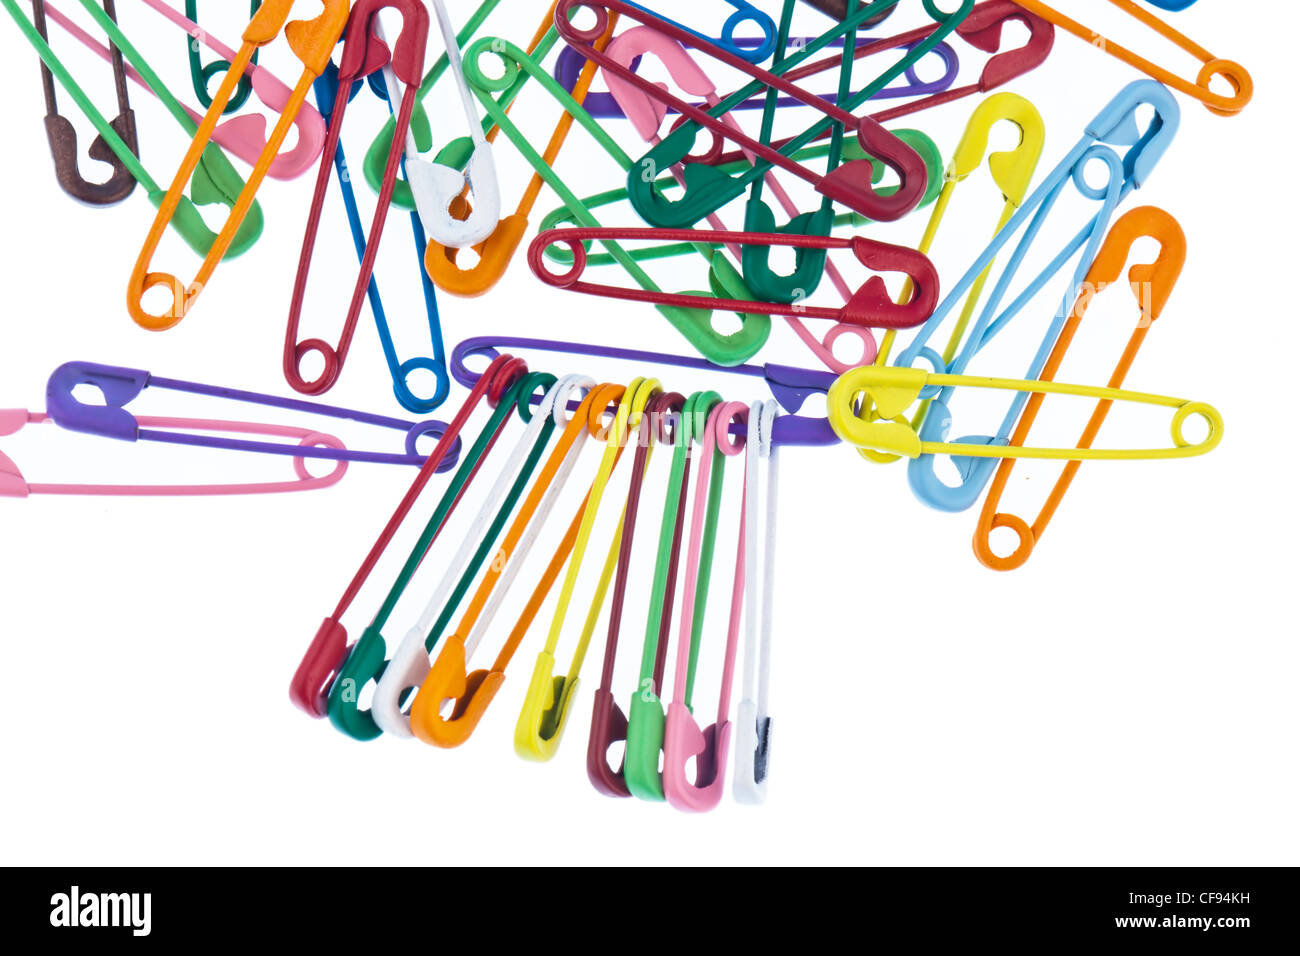 lots of colorful safety pin lying on a white background Stock Photo